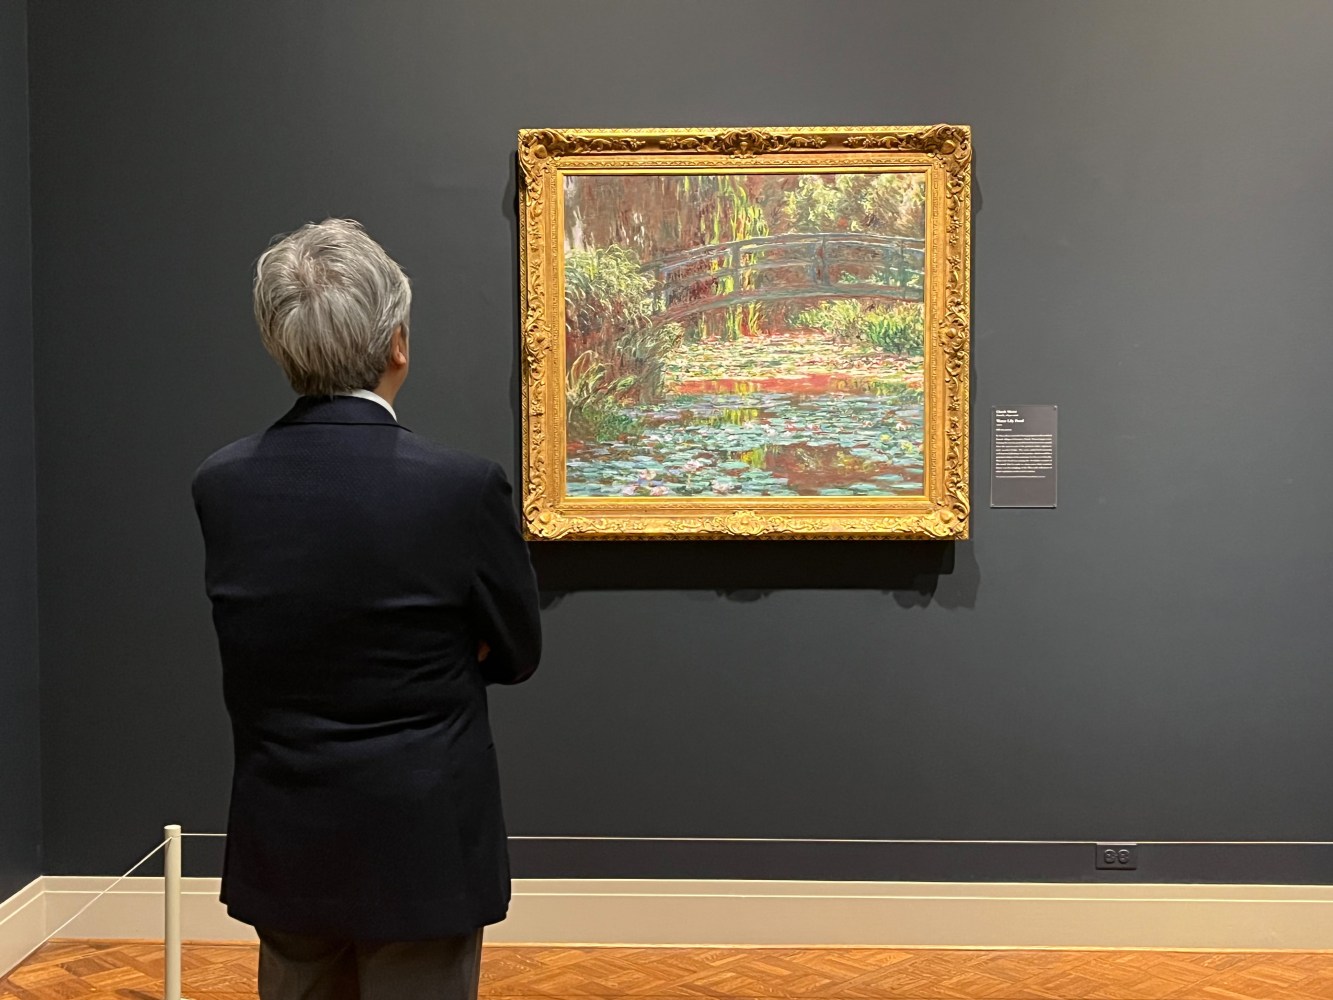 The Art Institute of Chicago is also famous for its world-class collection of Impressionists.&amp;nbsp;I was overwhelmed by Monet&amp;rsquo;s works. It will take months to see the works in the Museum, which include Van Gogh&amp;rsquo;s &amp;ldquo;The Bedroom&amp;rdquo;, Cezanne&amp;rsquo;s still life &amp;ldquo;The basket of Apples&amp;quot;.